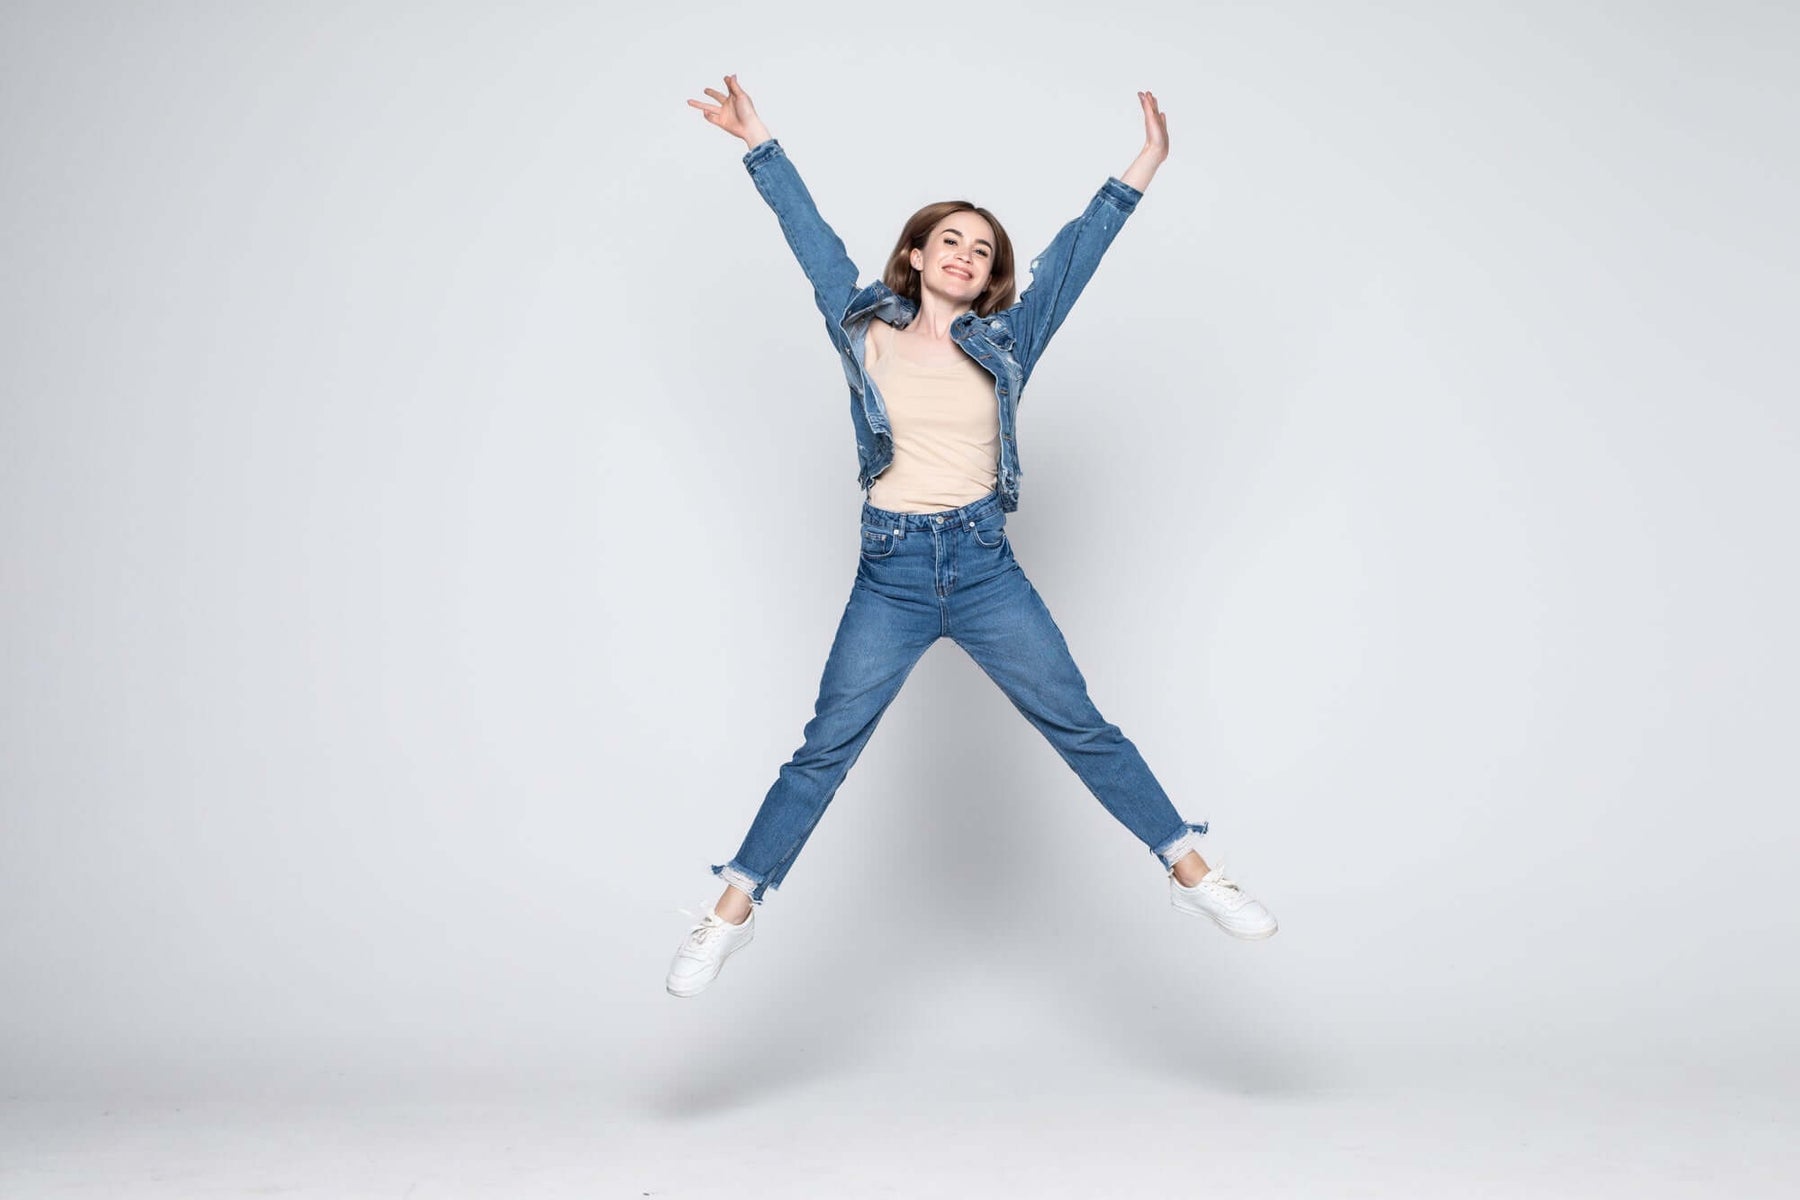 Woman jumping in denim jacket and jeans against grey background